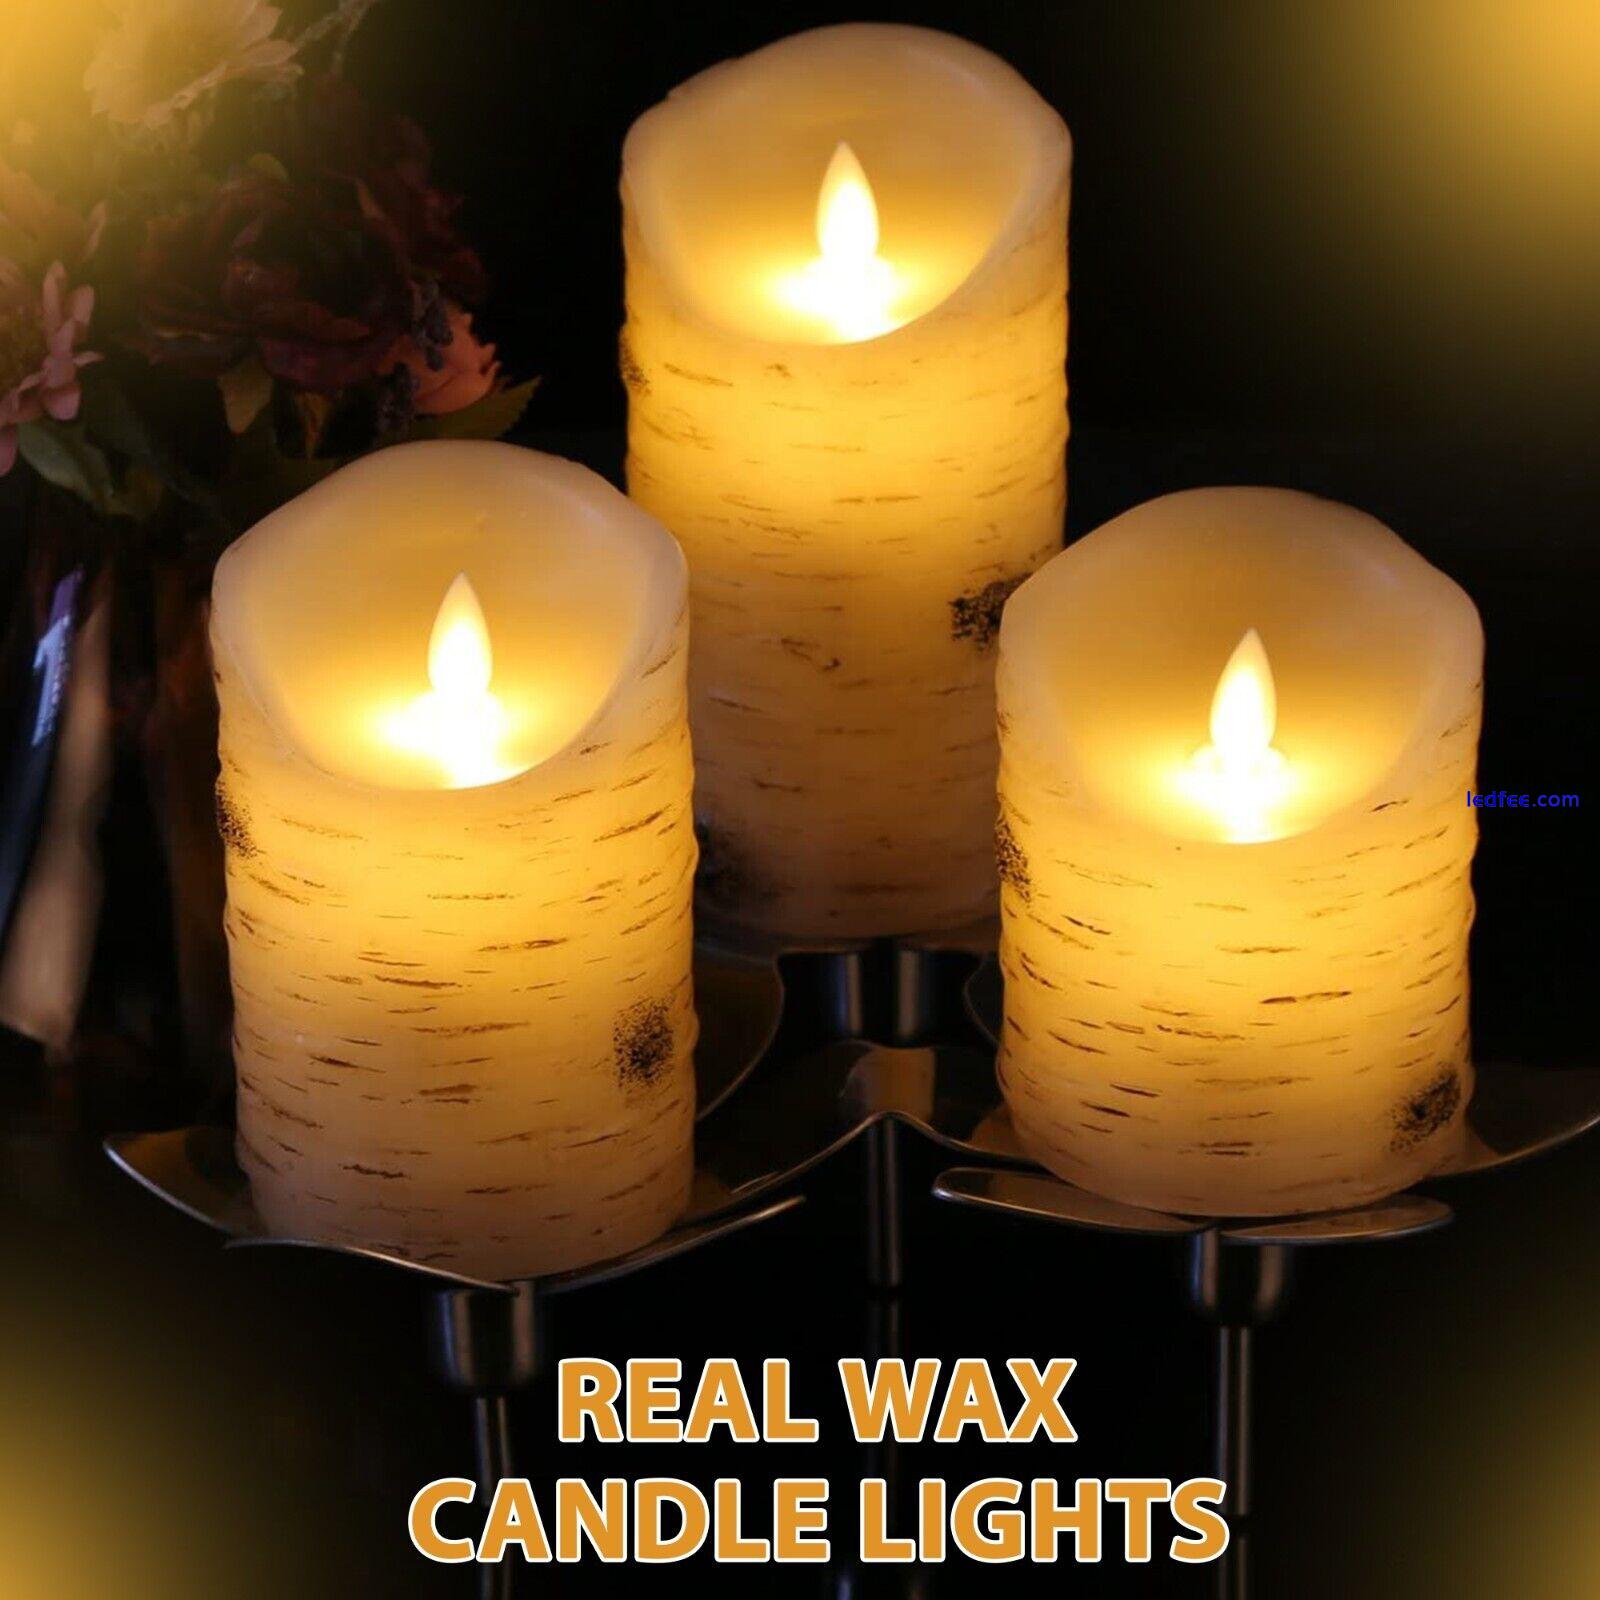 3 Set Flickering LED Candles Real Wax Battery Powered Lights Remote Control Lamp 2 